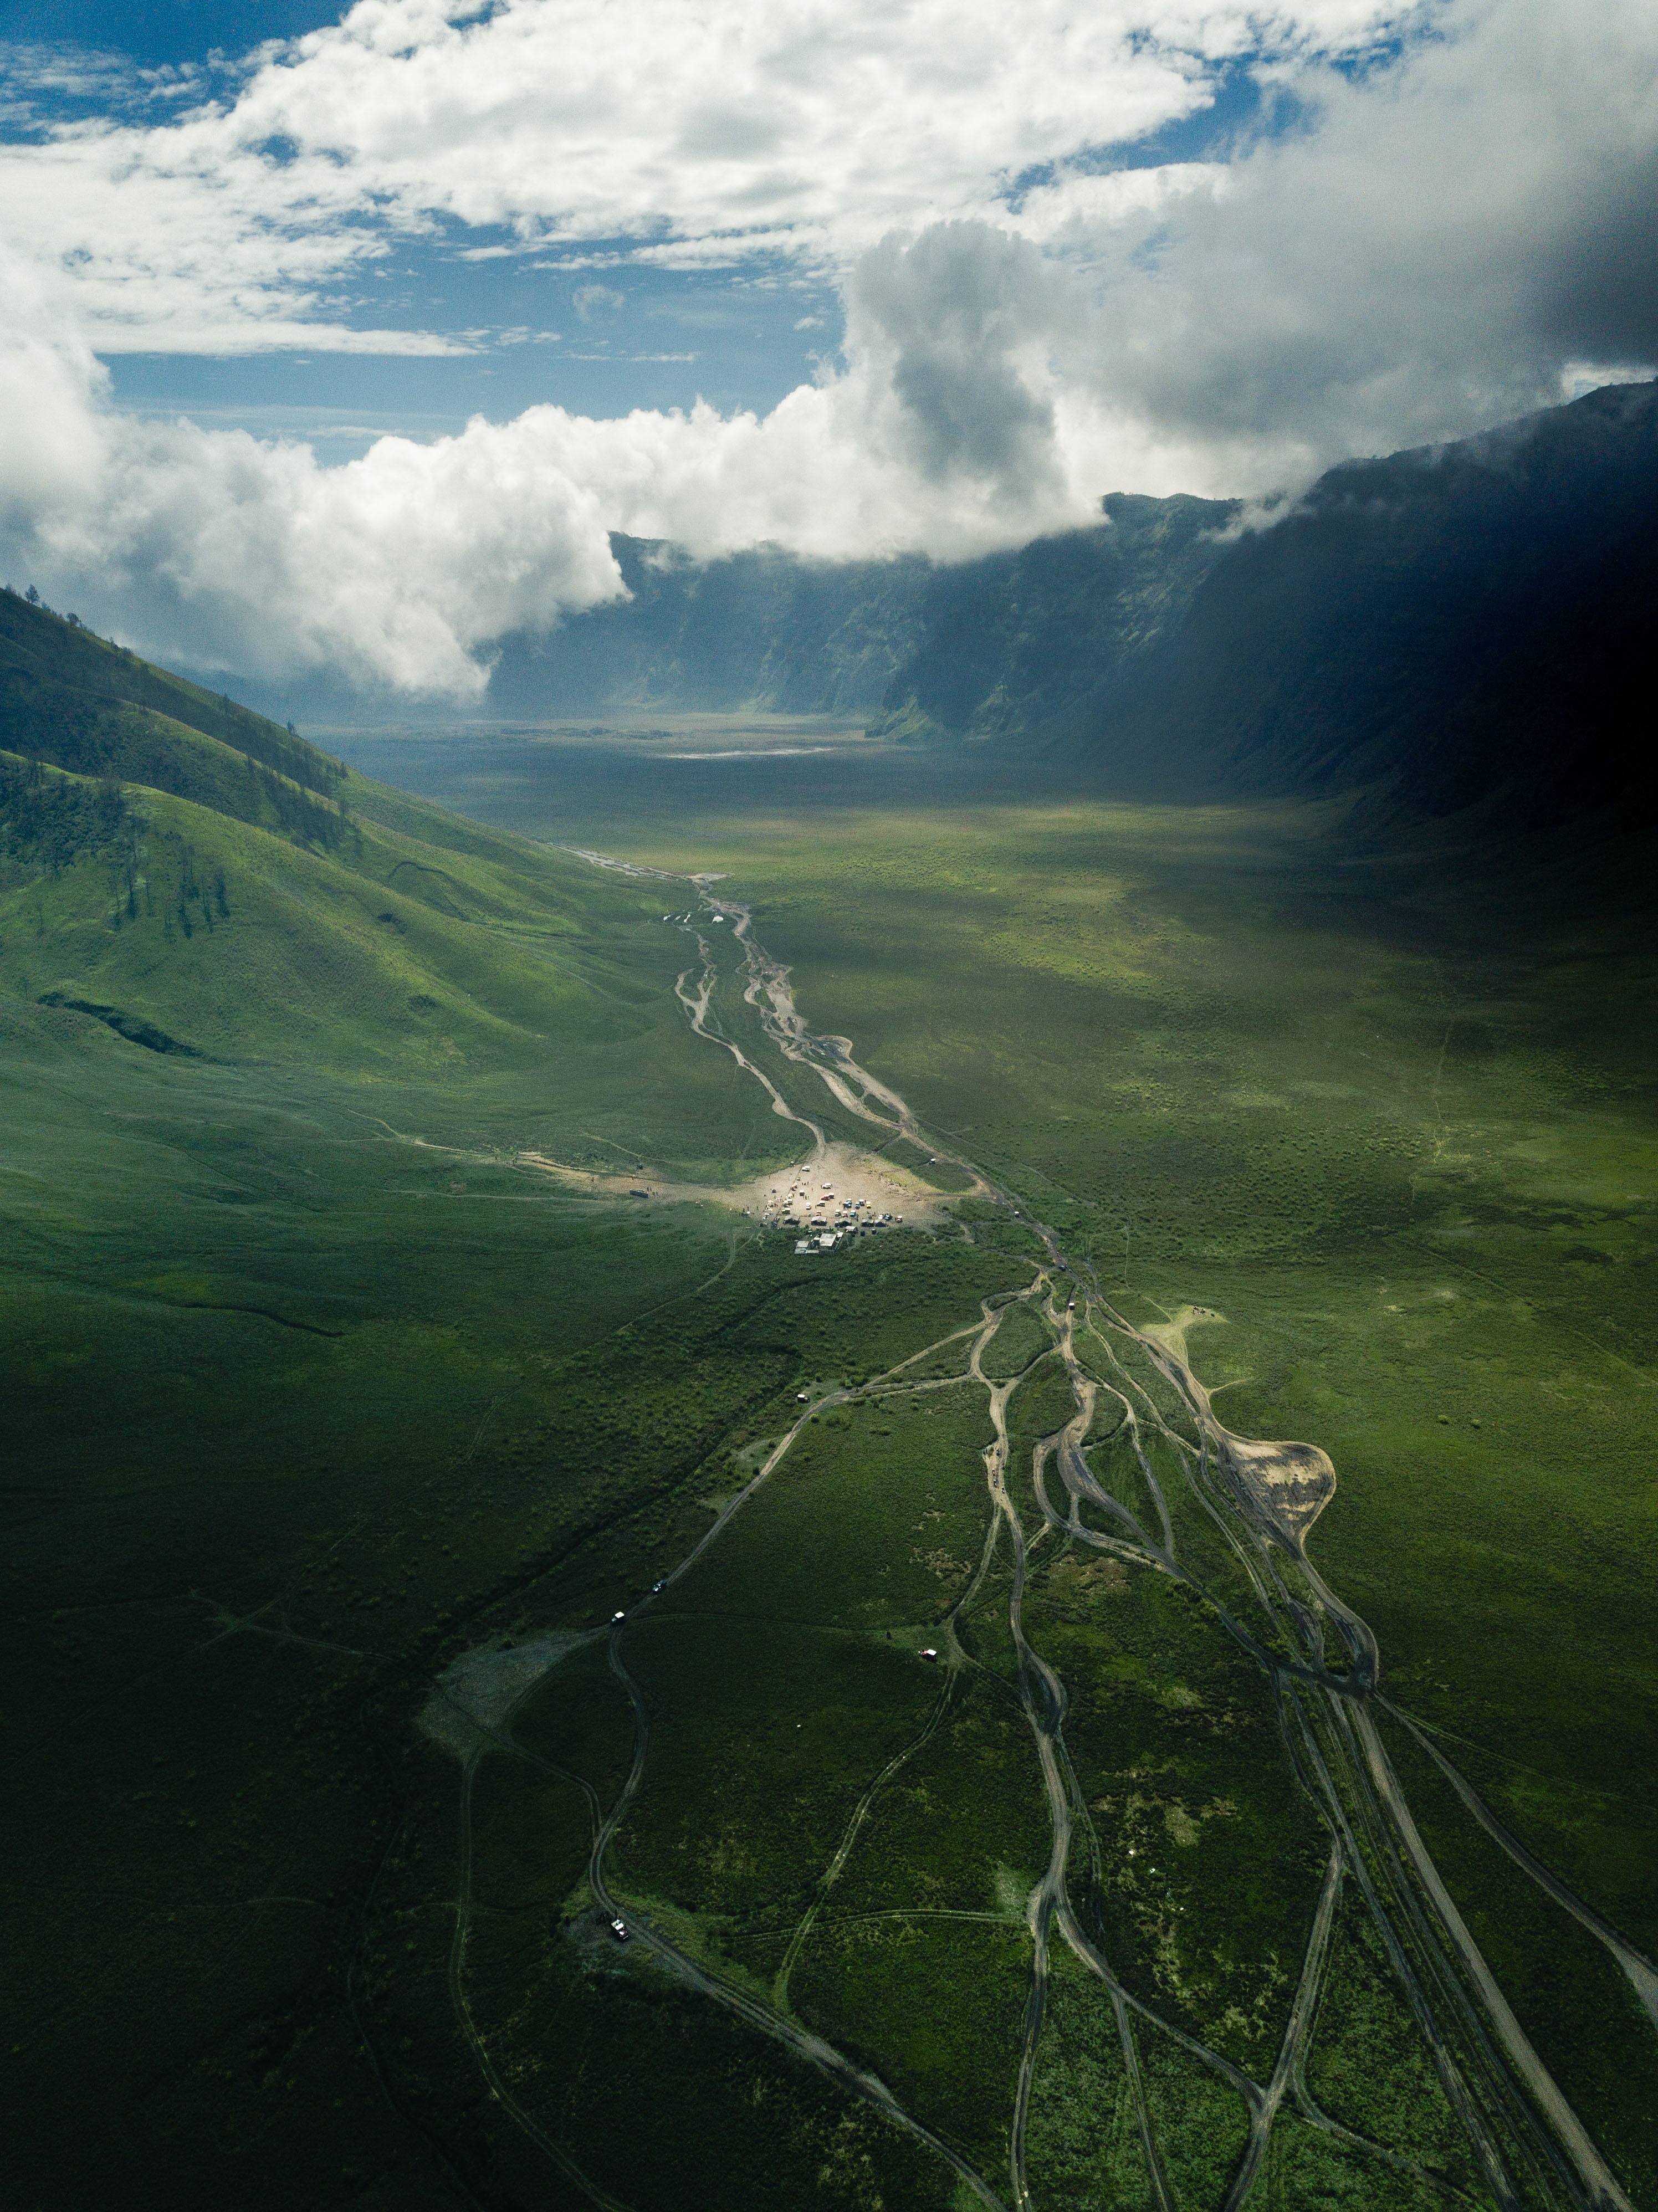 view from above, roads, landscape, nature, clouds, hills, valley